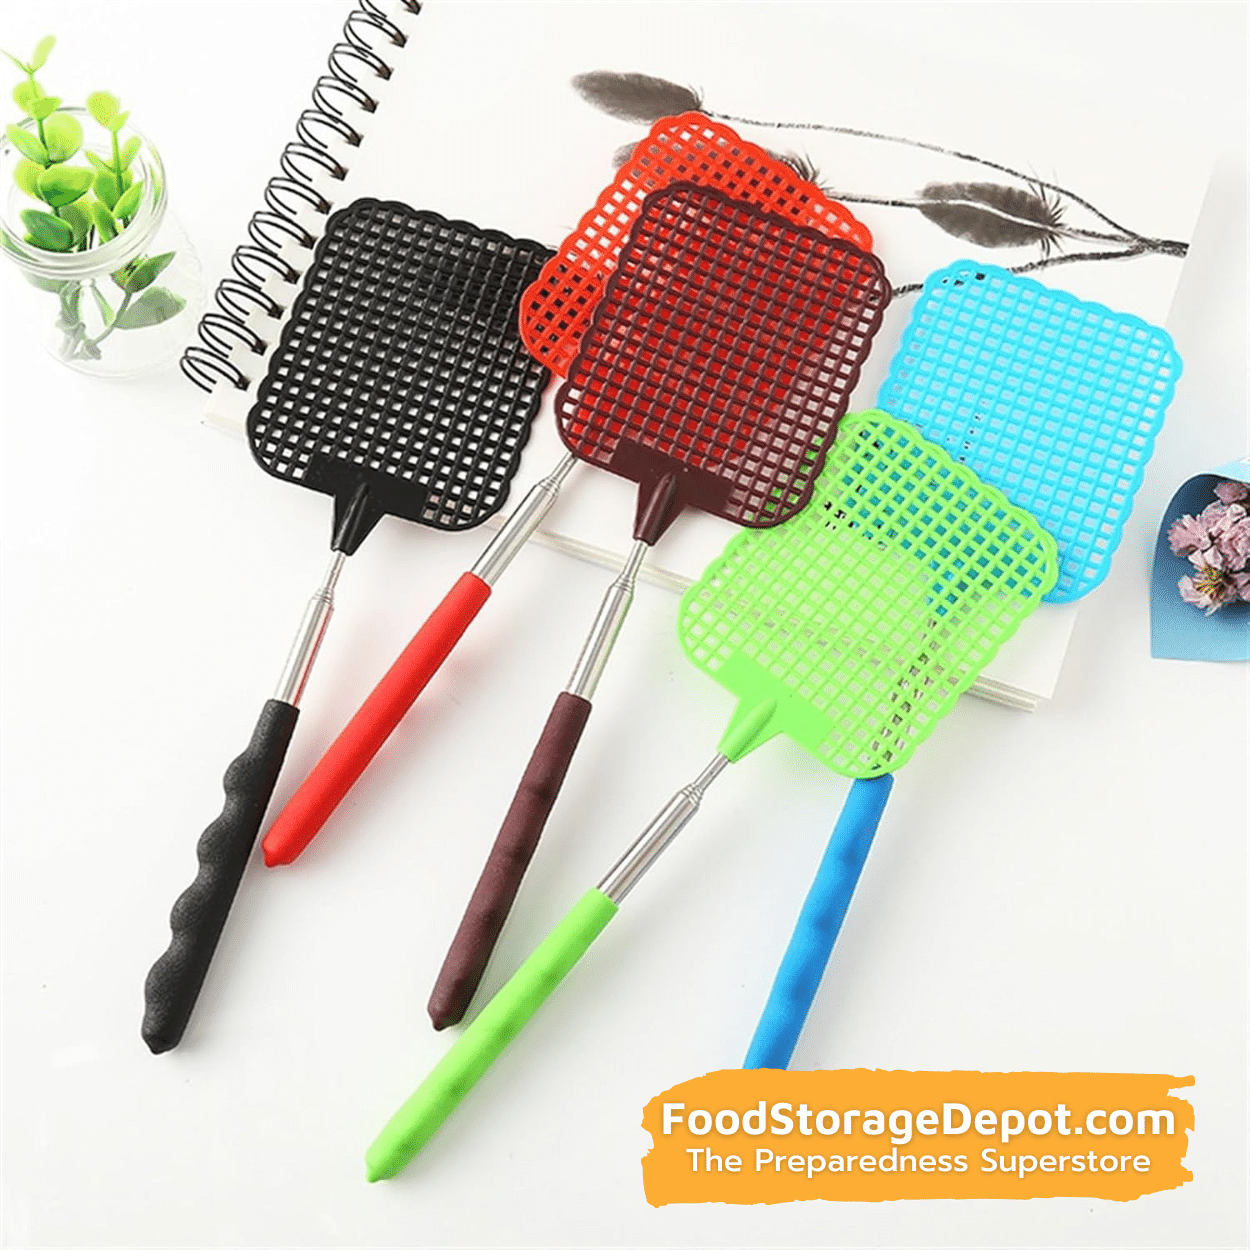 Telescoping Fly Swatter (Extends Over 28 Inches!)